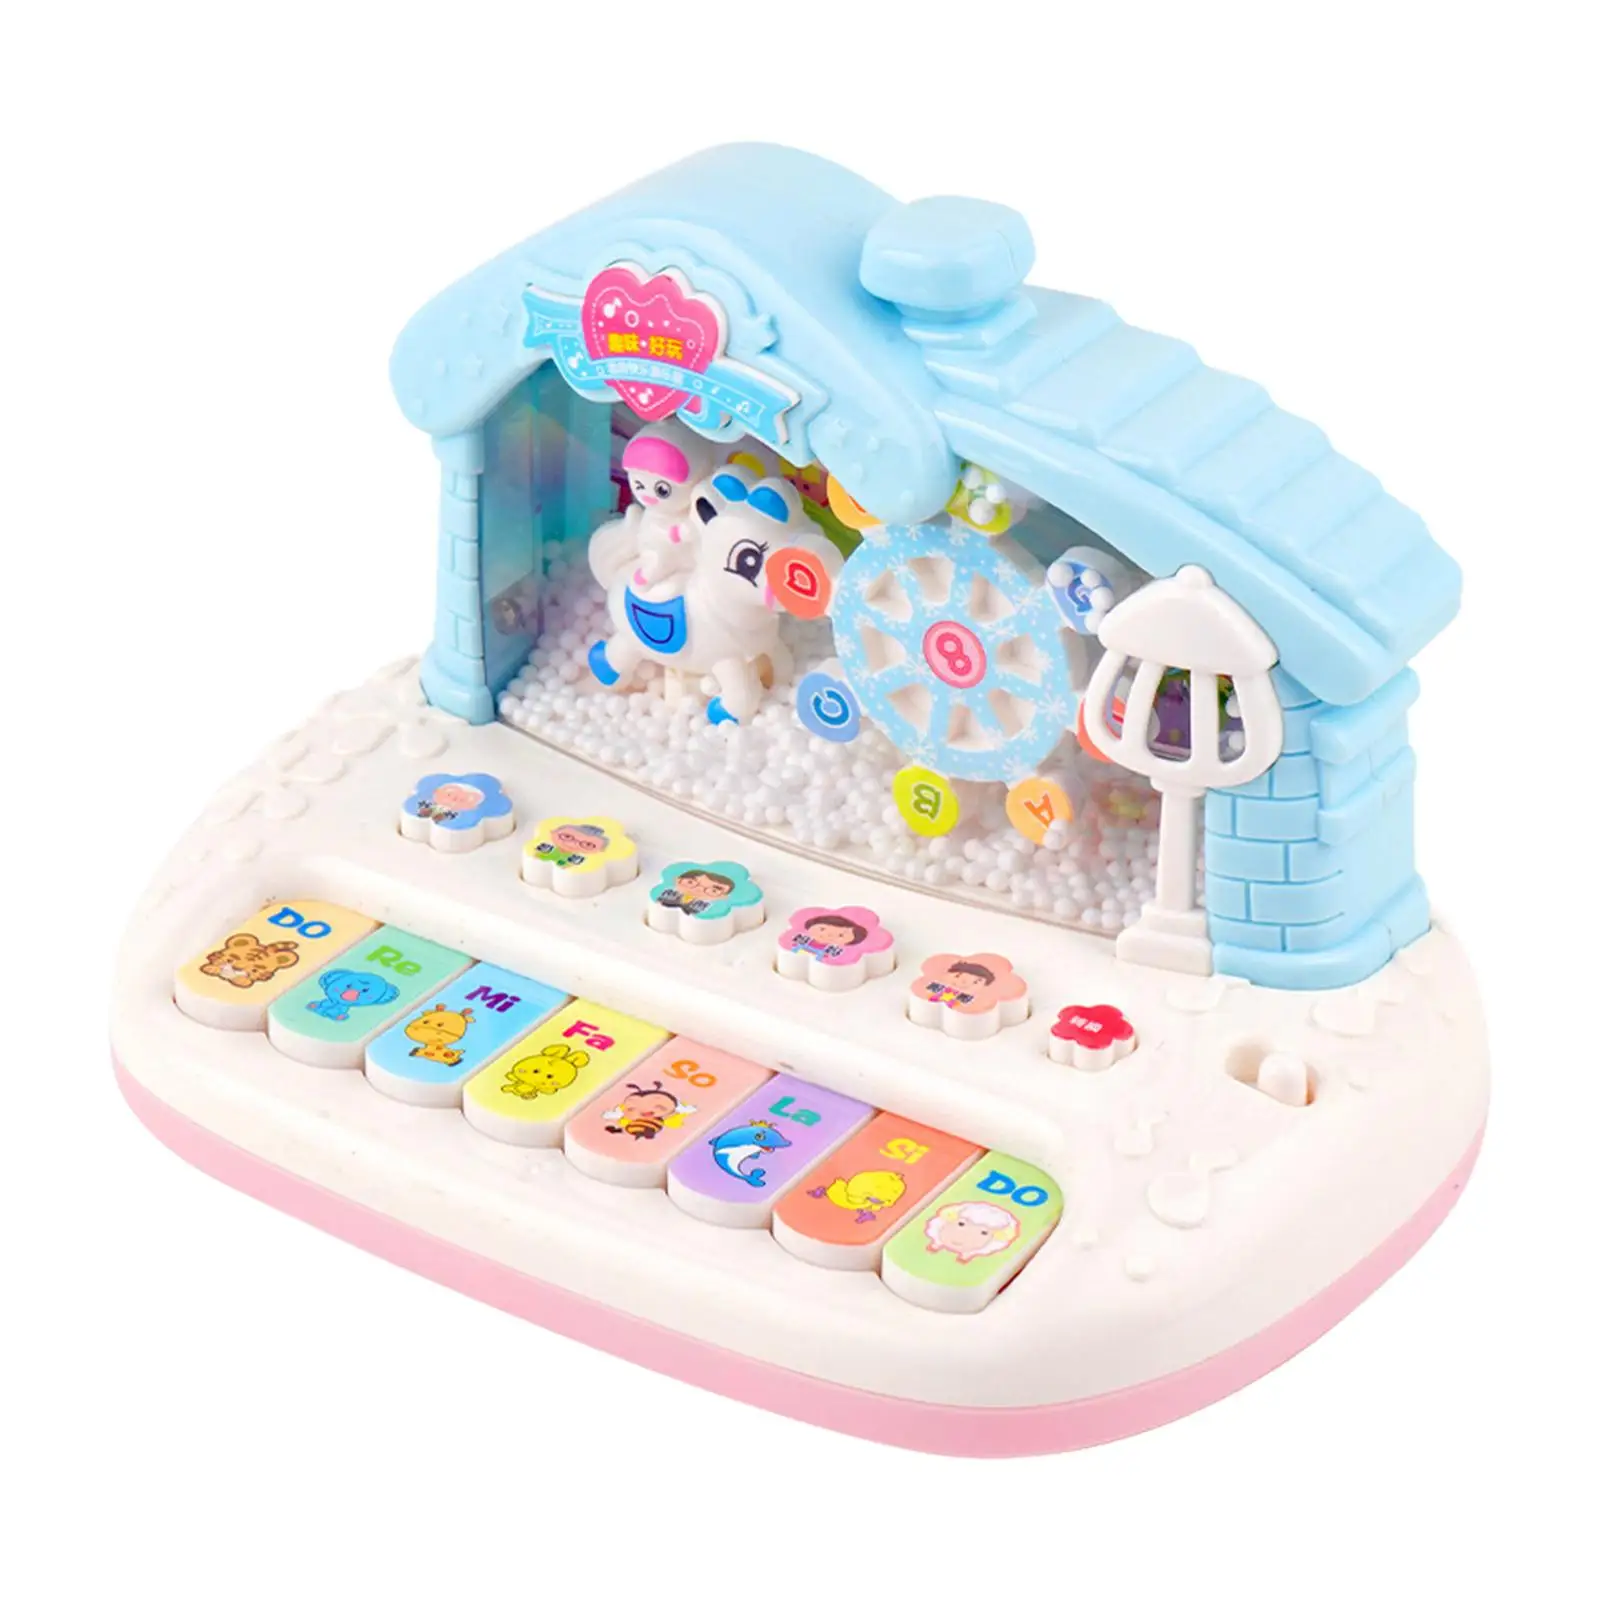 Simulation Musical Instrument with Sound Light Snowflake Learning Toys Electronic Piano Toy for 1 2 3 Year Old Boys Girls Gifts